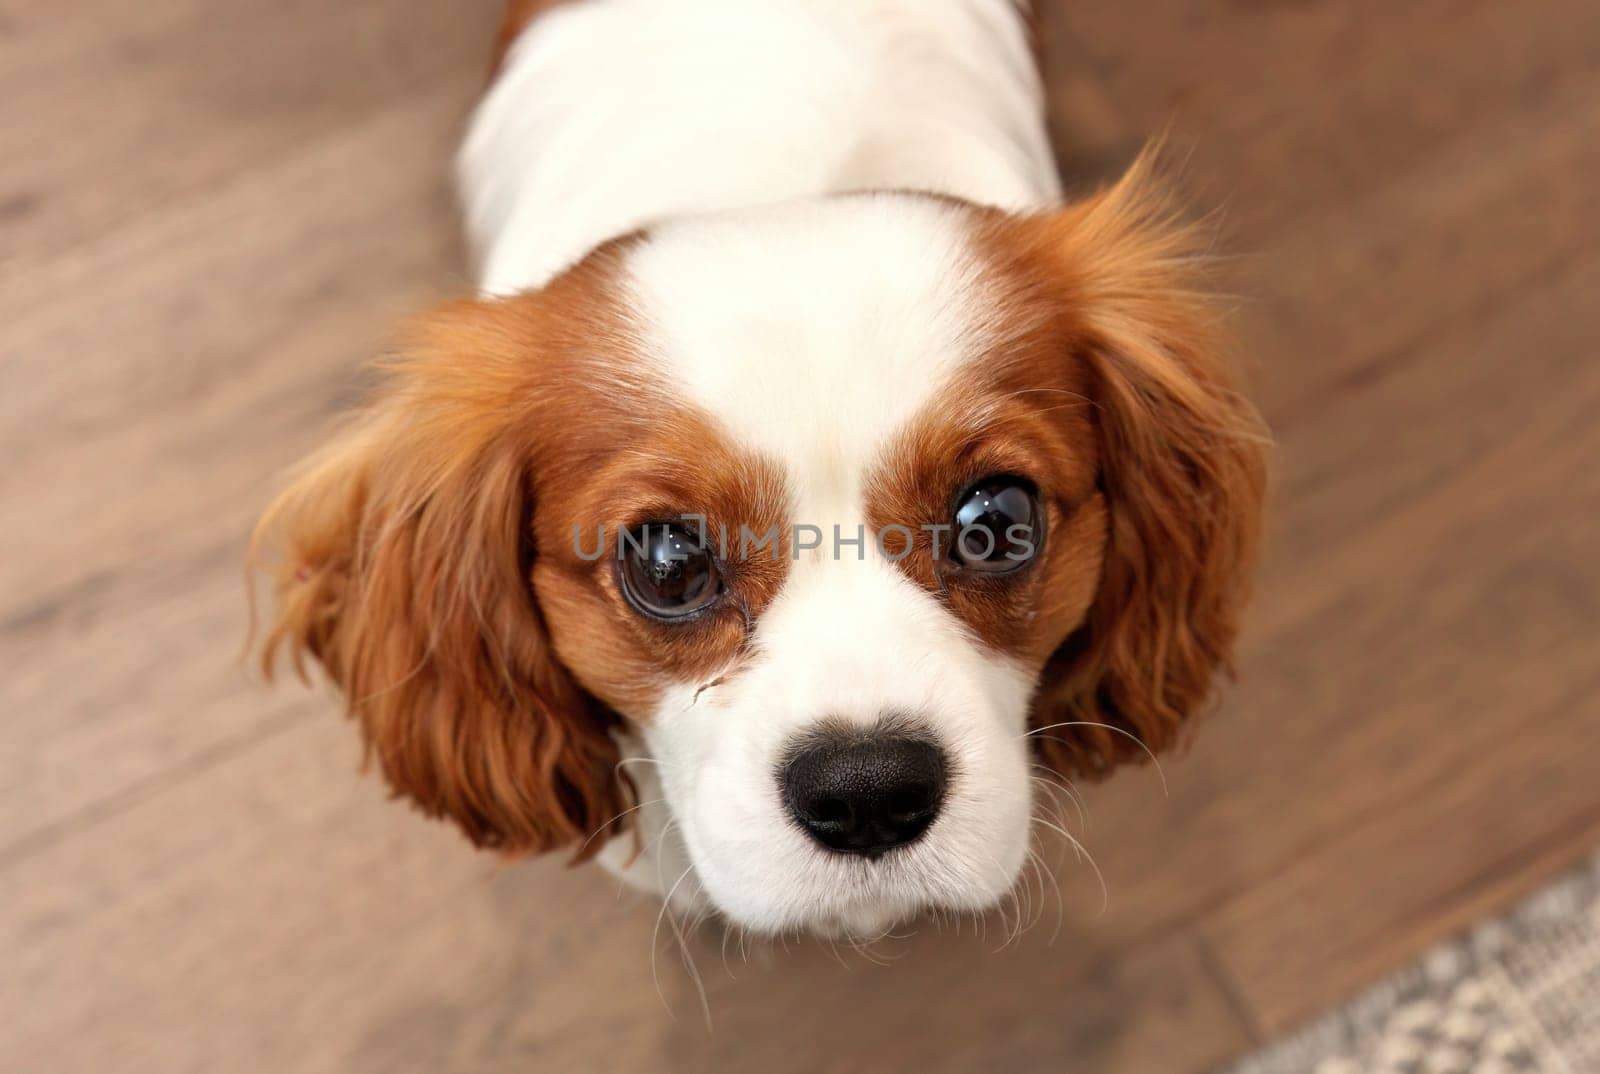 Adorable Cavalier King Charles Spaniel with corneal ulcer eye injury looking up with adorable expression